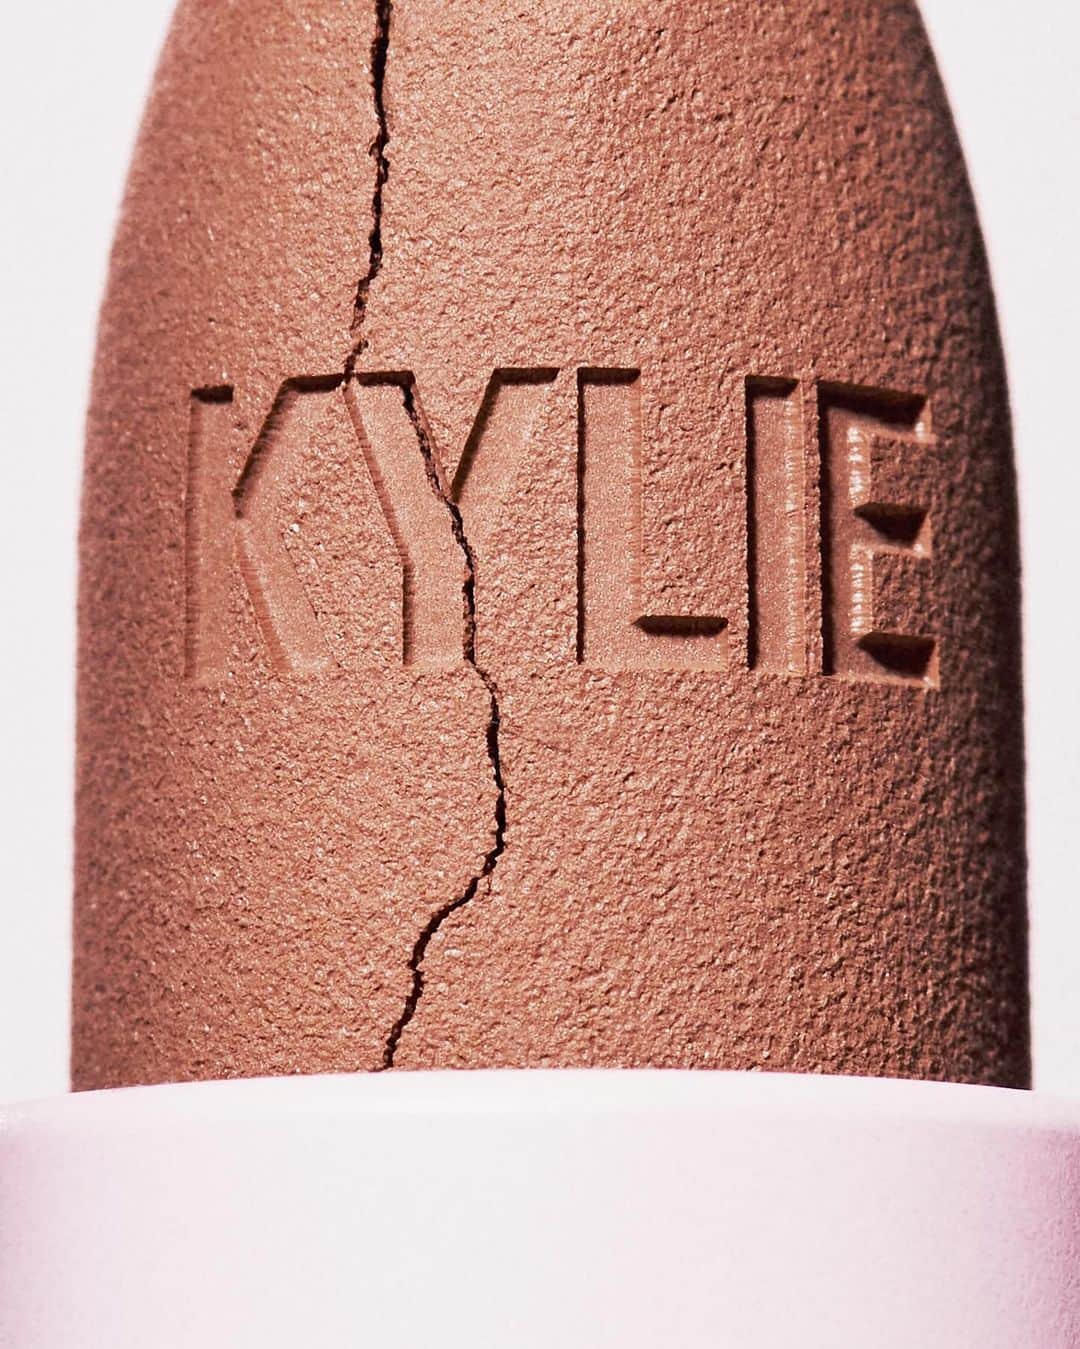 Kylie Cosmeticsのインスタグラム：「"the best lipstick i’ve ever used. so smooth and has long-lasting color. my absolute favorite!" - thanks crystal for your review of our matte lipstick 🫶」